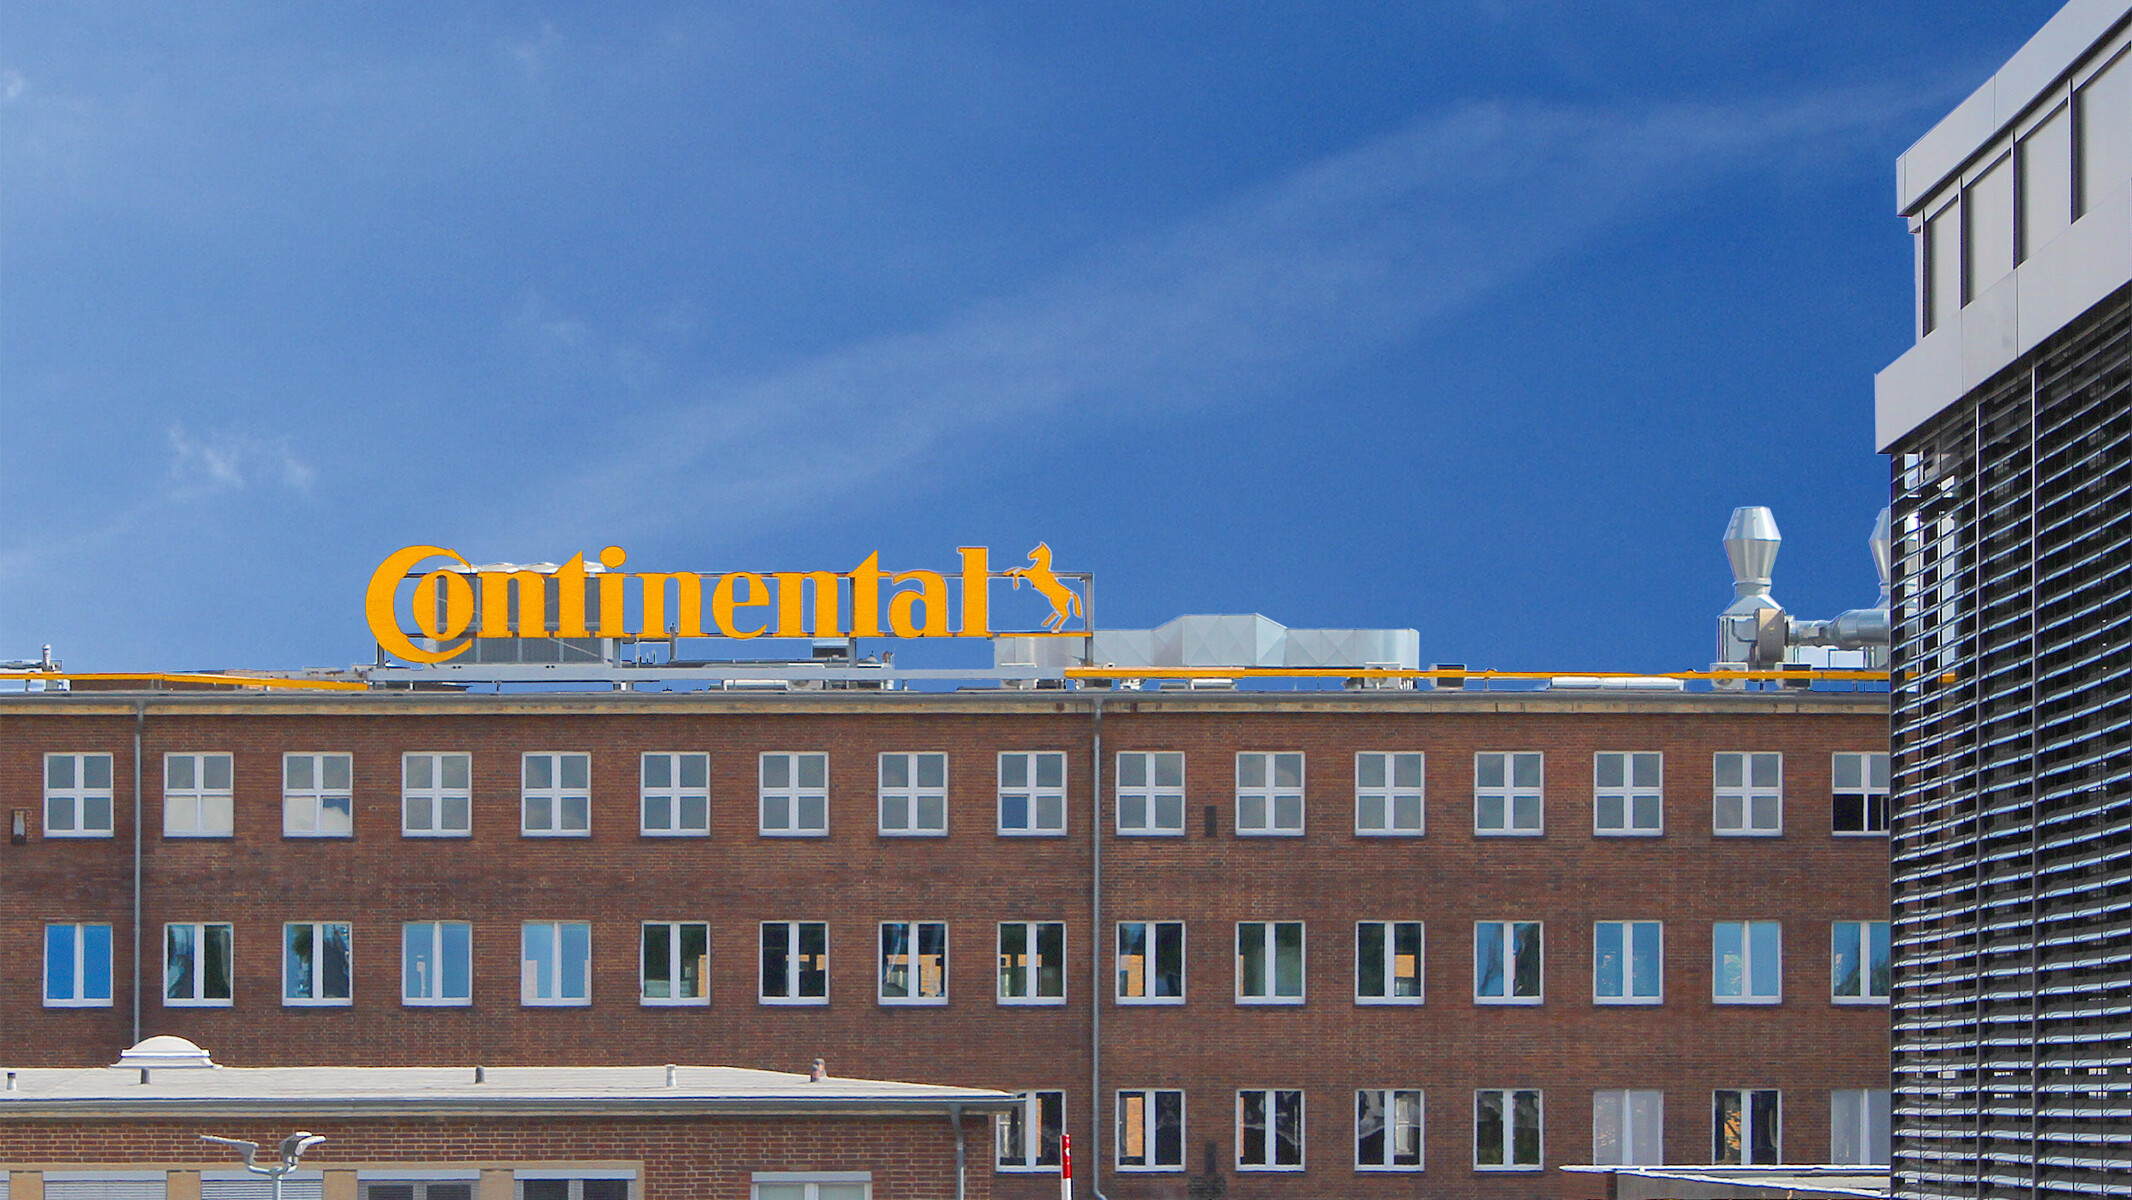 The company premises of Continental AG in Hanover from the outside